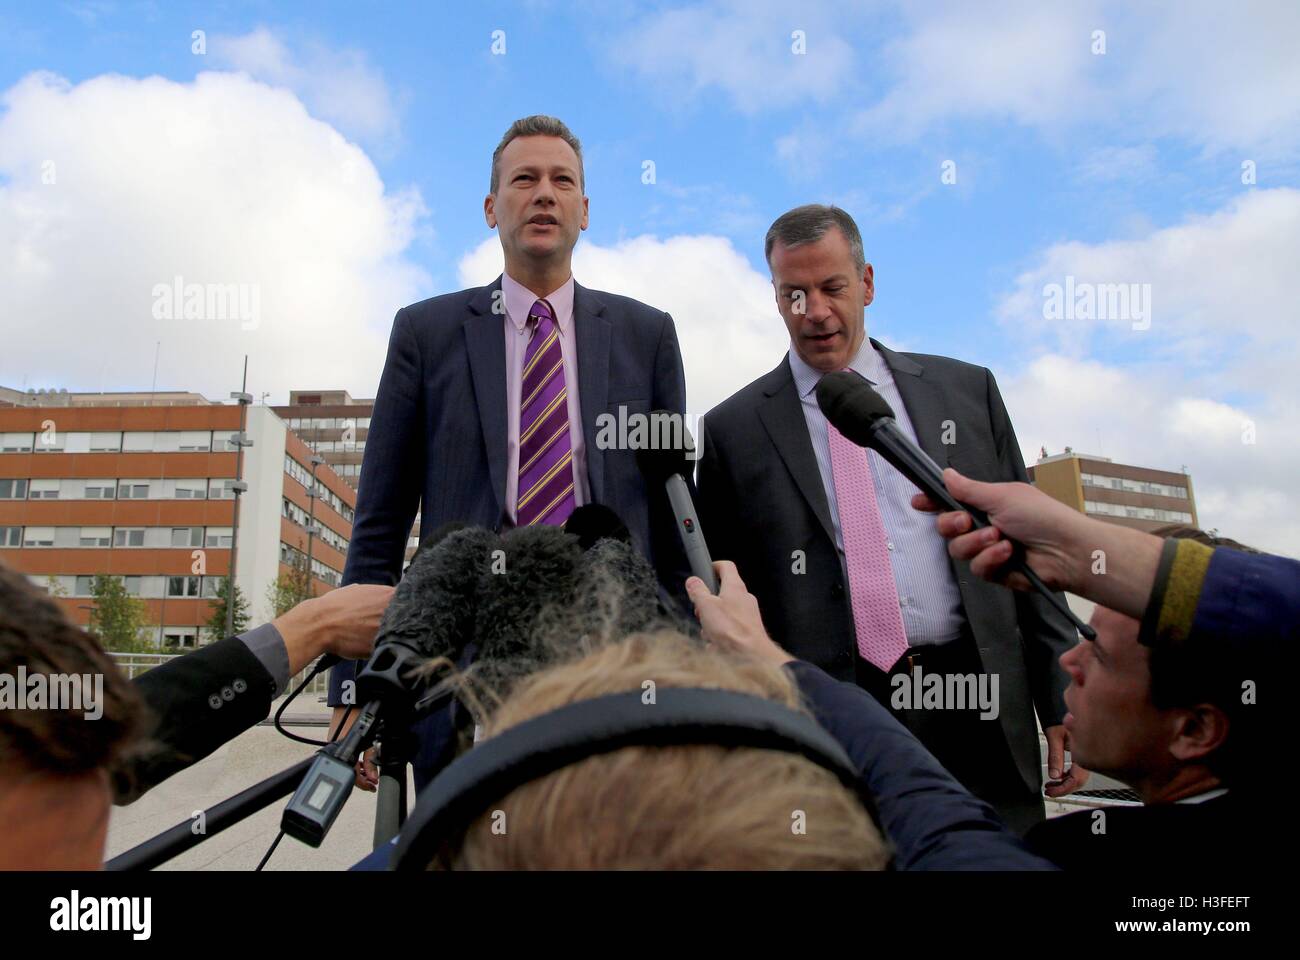 Nathan Gill (left), Ukip MEP for Wales accompanied by Ukip spokesman Hermann Kelly, speak to the media outside the Hopital De Hautepierre in Strasbourg, France, where Ukip MEP Steve Woolfe is recovering following an altercation with another colleague in the European Parliament yesterday. Stock Photo